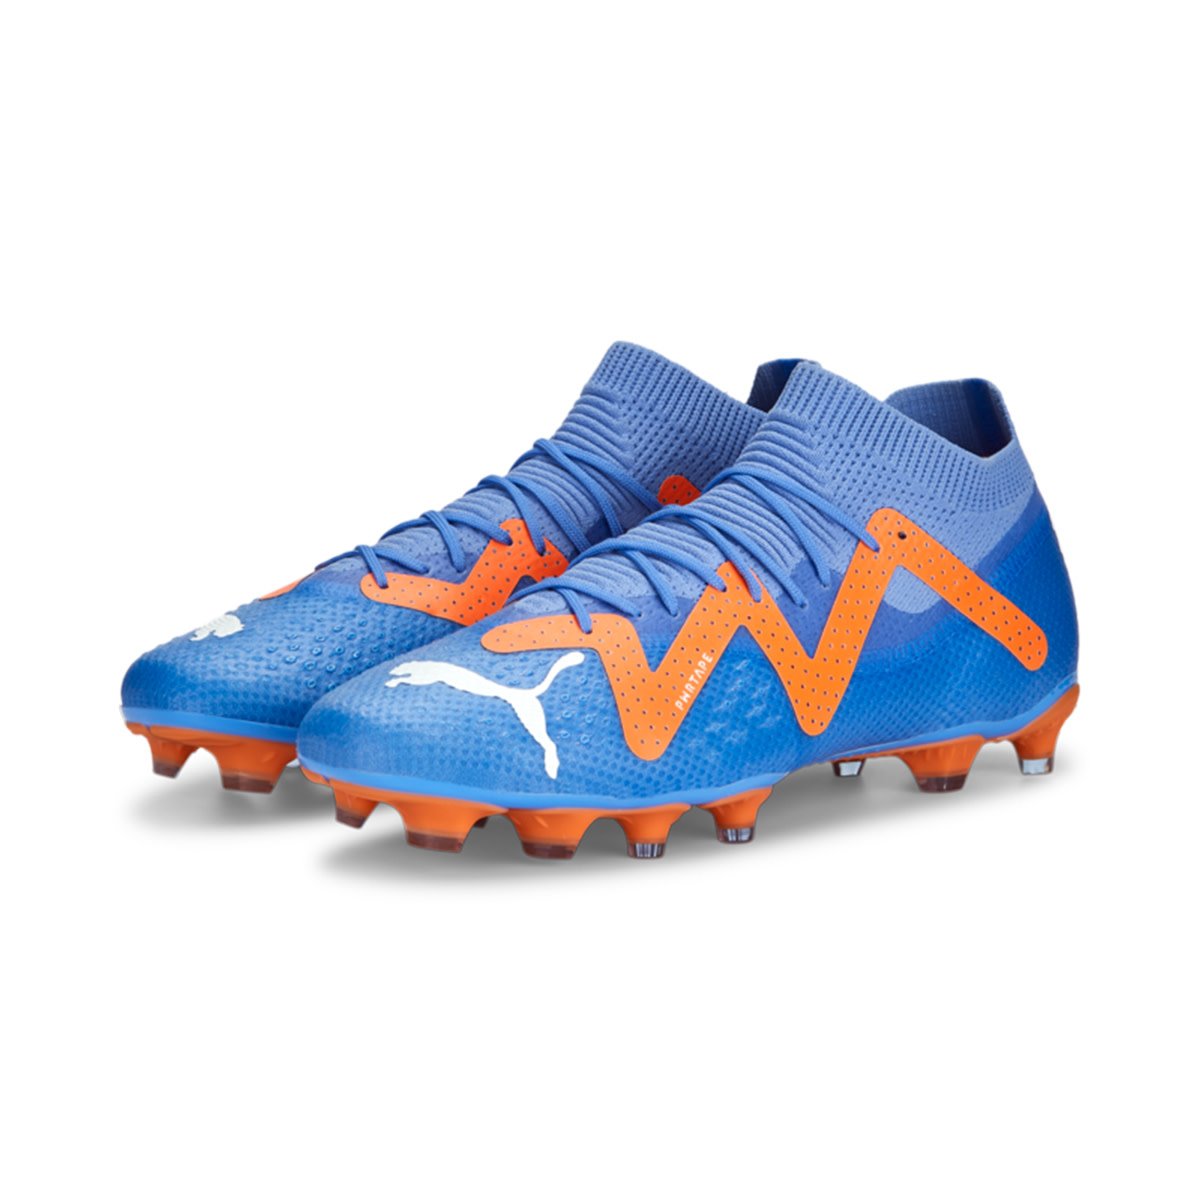 PUMA Future Pro: Redefining Performance and Precision in Football Footwear